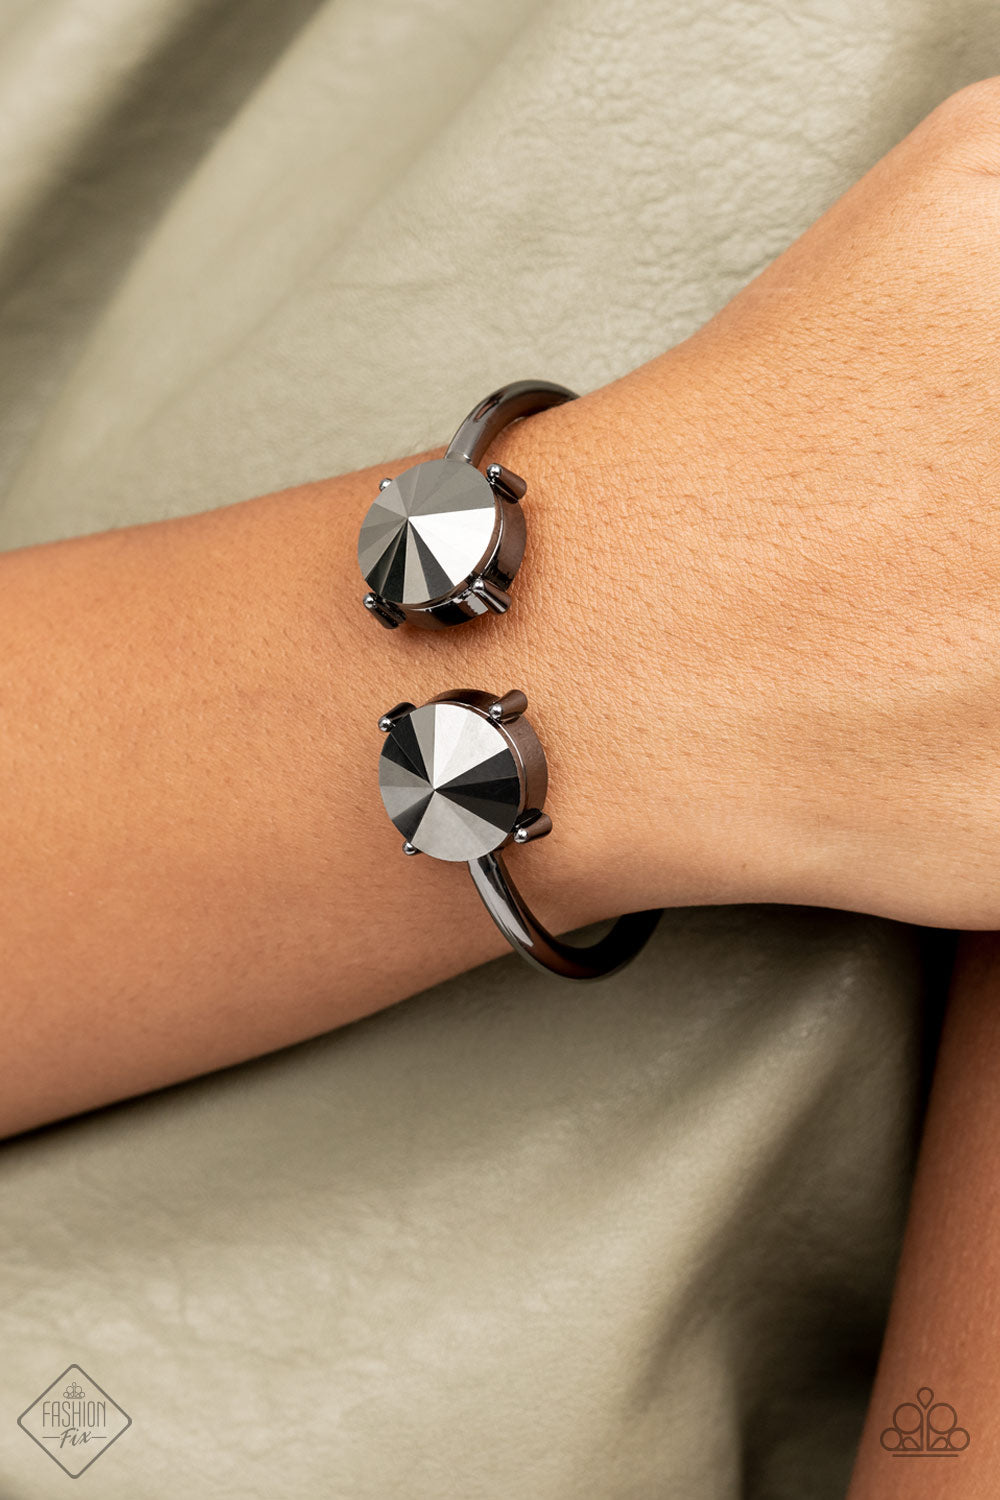 Spark and Sizzle - Black - VJ Bedazzled Jewelry